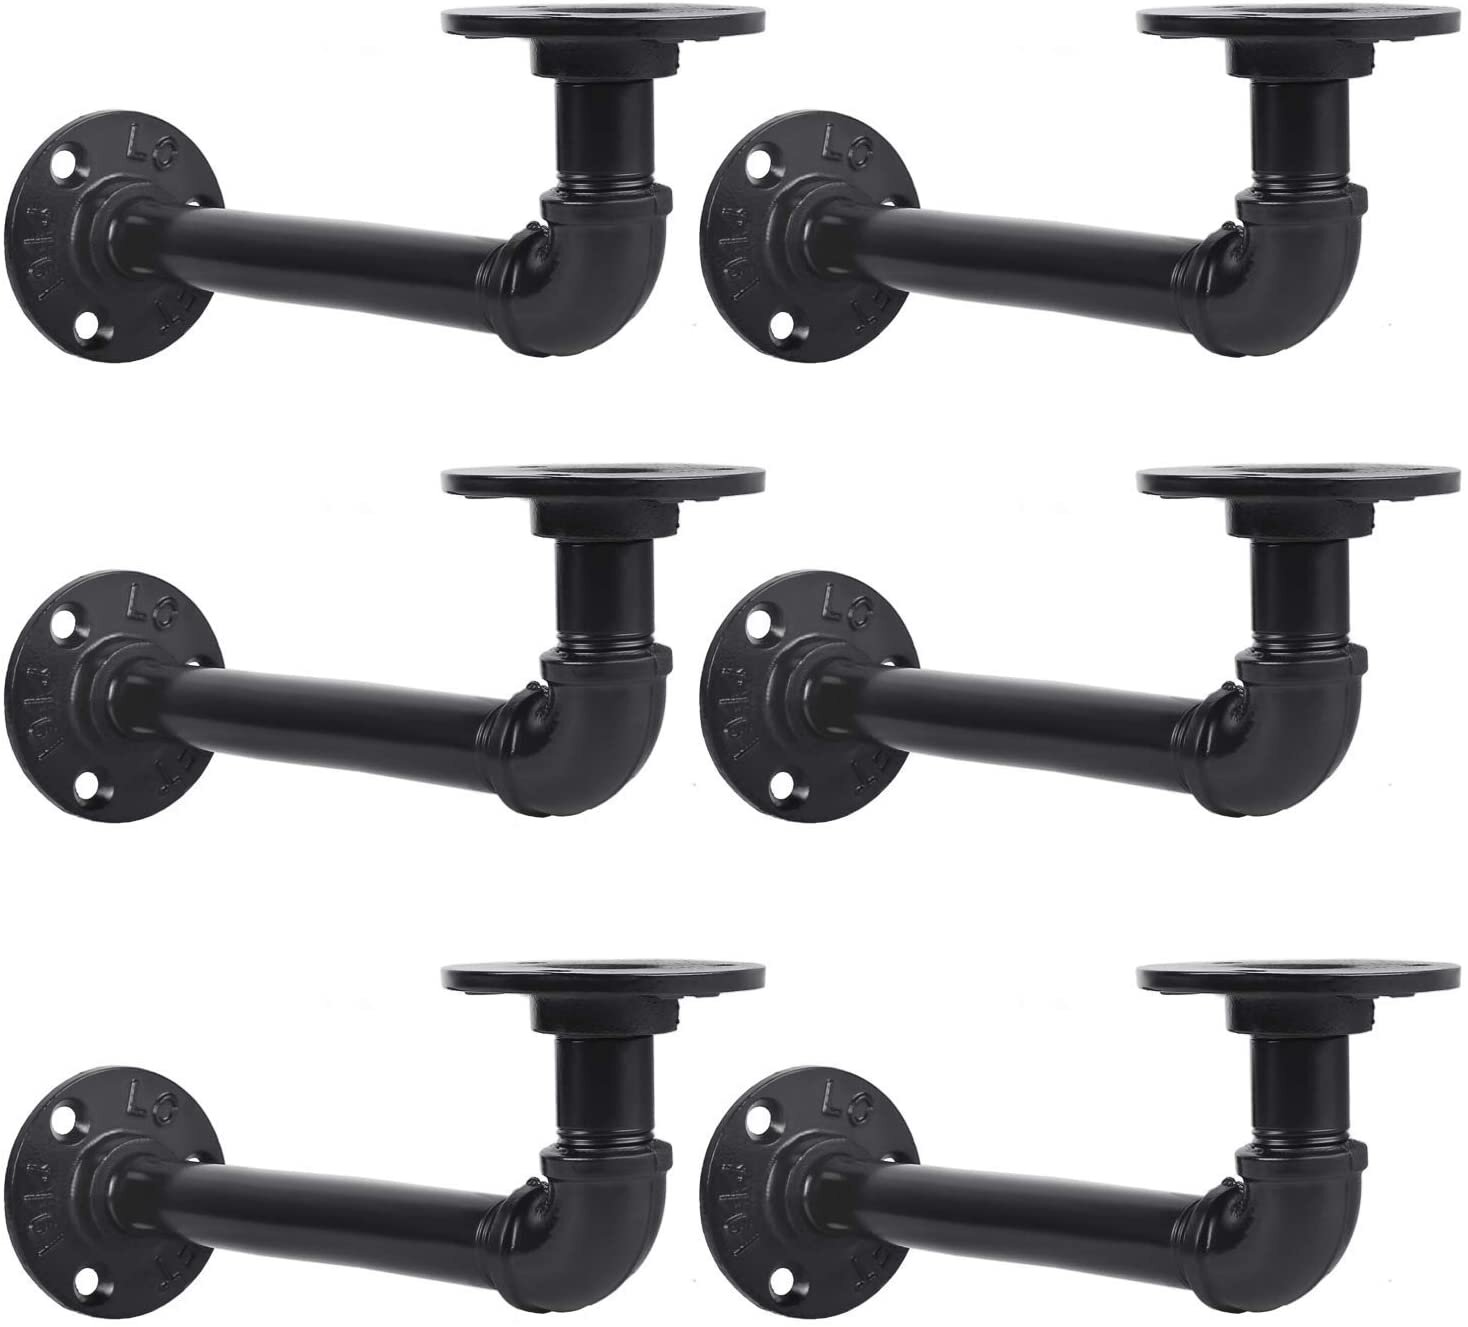 Industrial Pipe Shelf L Brackets for Vintage and Rustic Home Décor with Hardware 